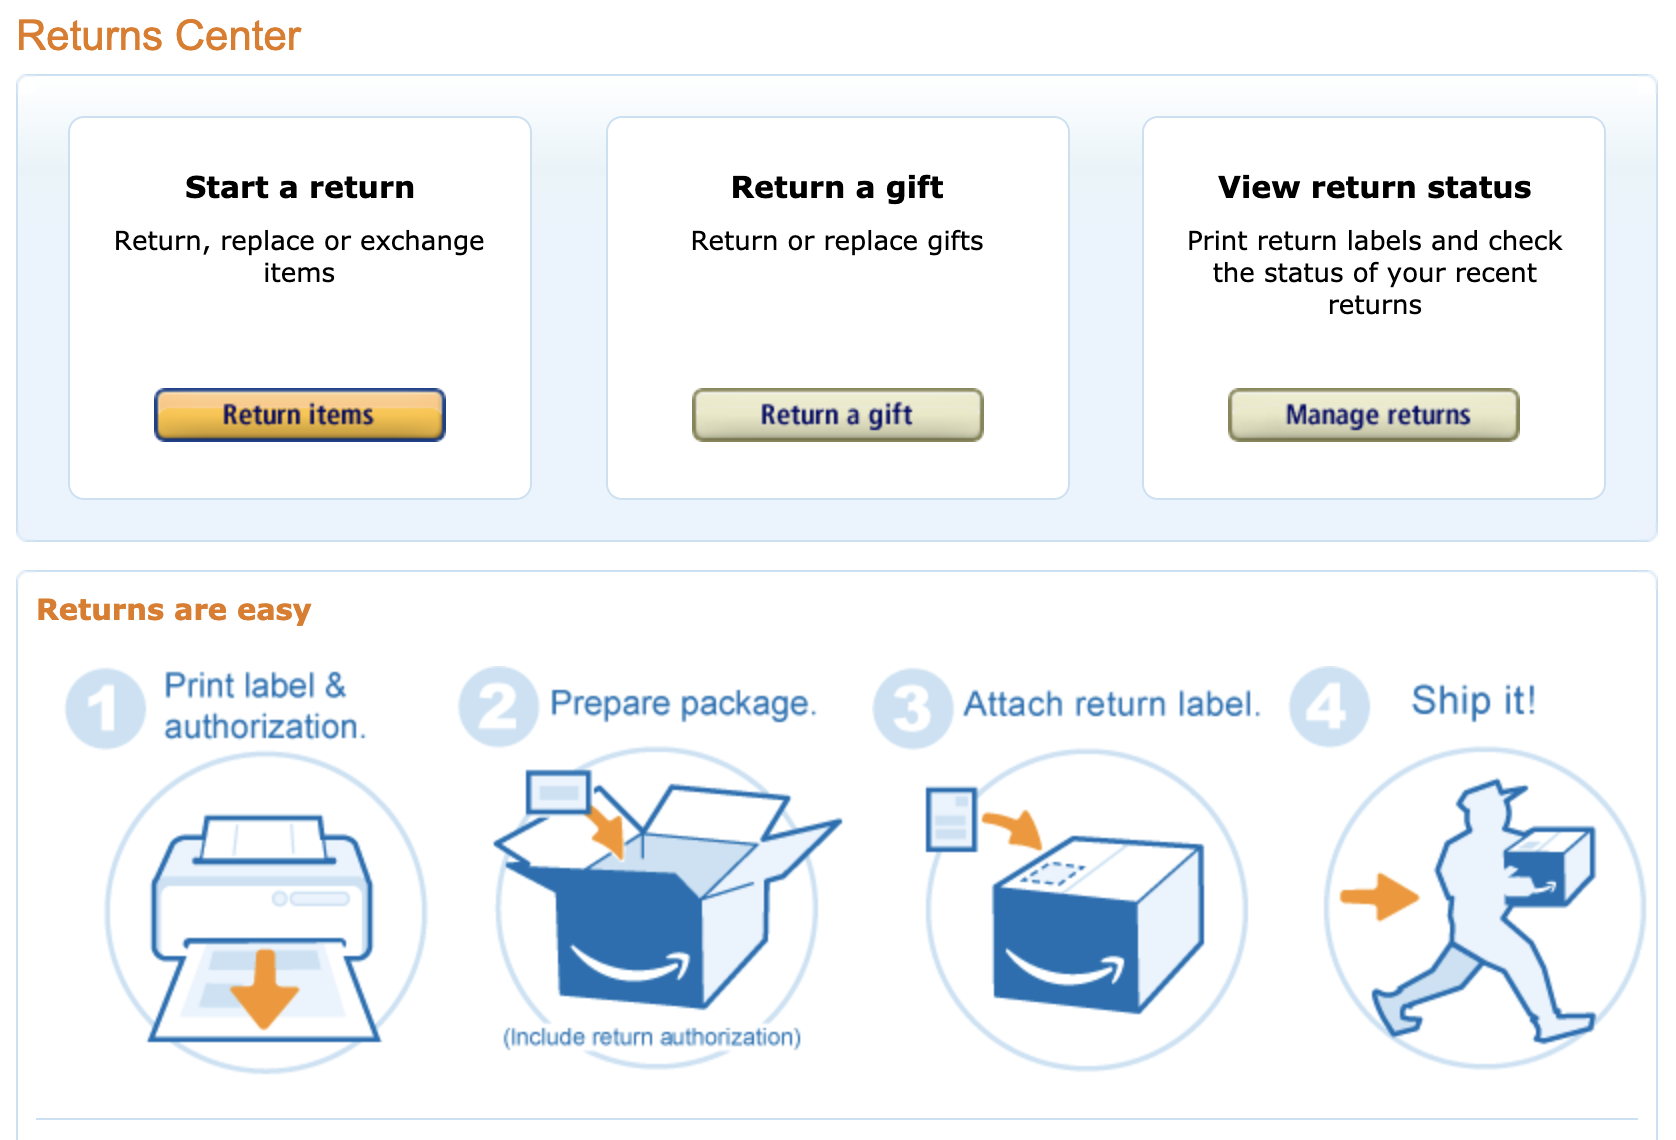 2. Amazon’s customer return policy actually gets you more sales. 